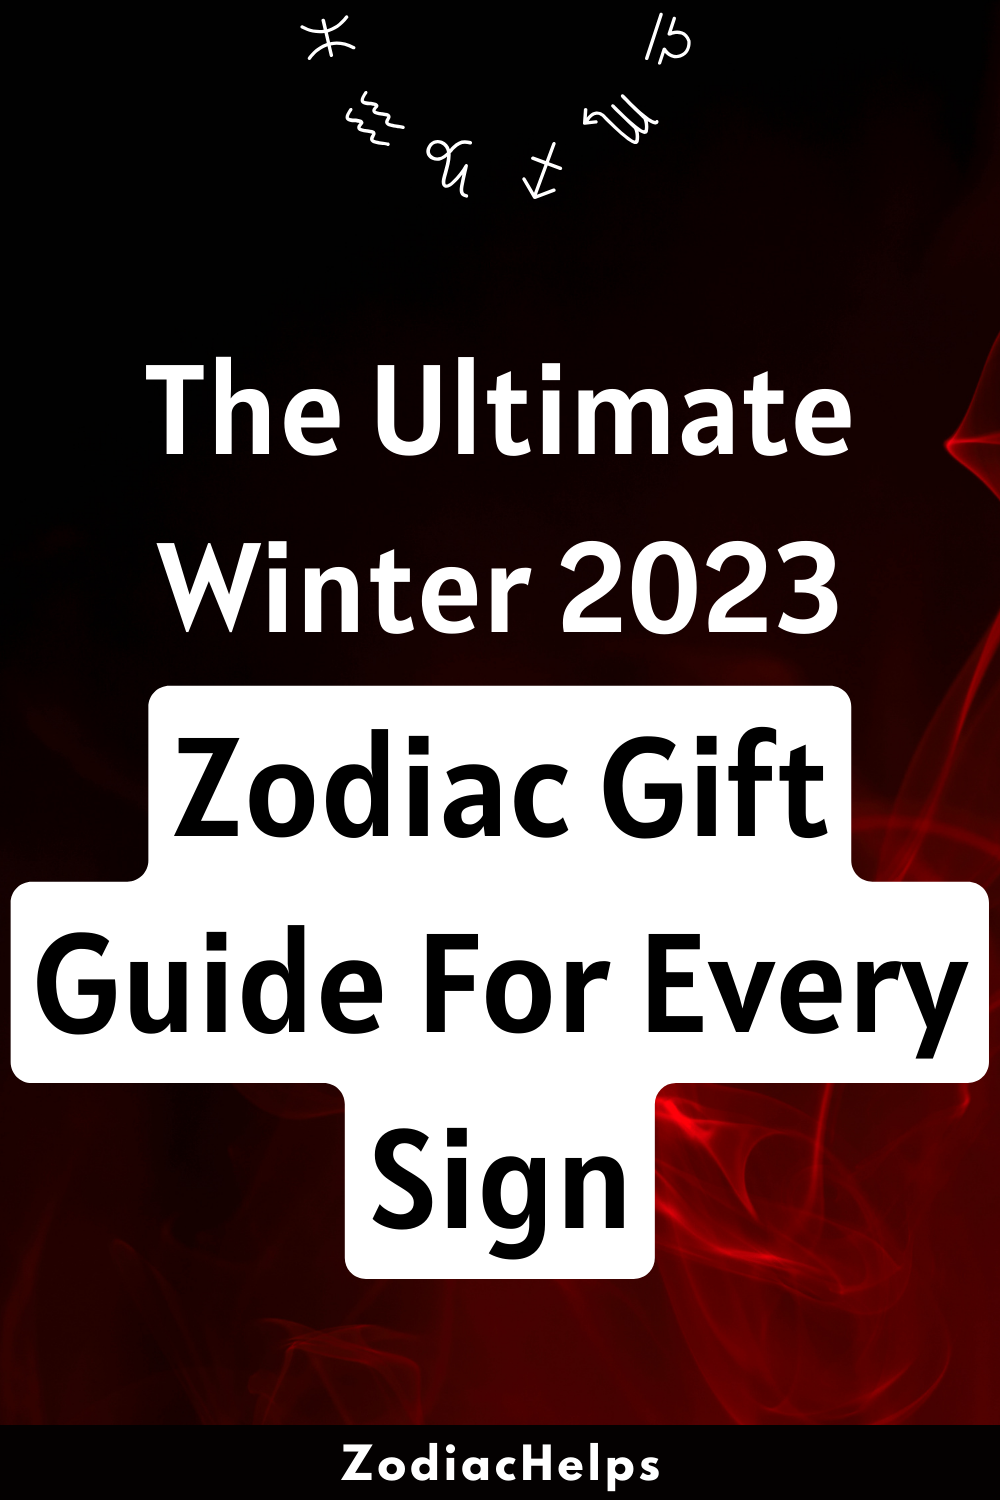 The Ultimate Winter 2023 Zodiac Gift Guide For Every Sign